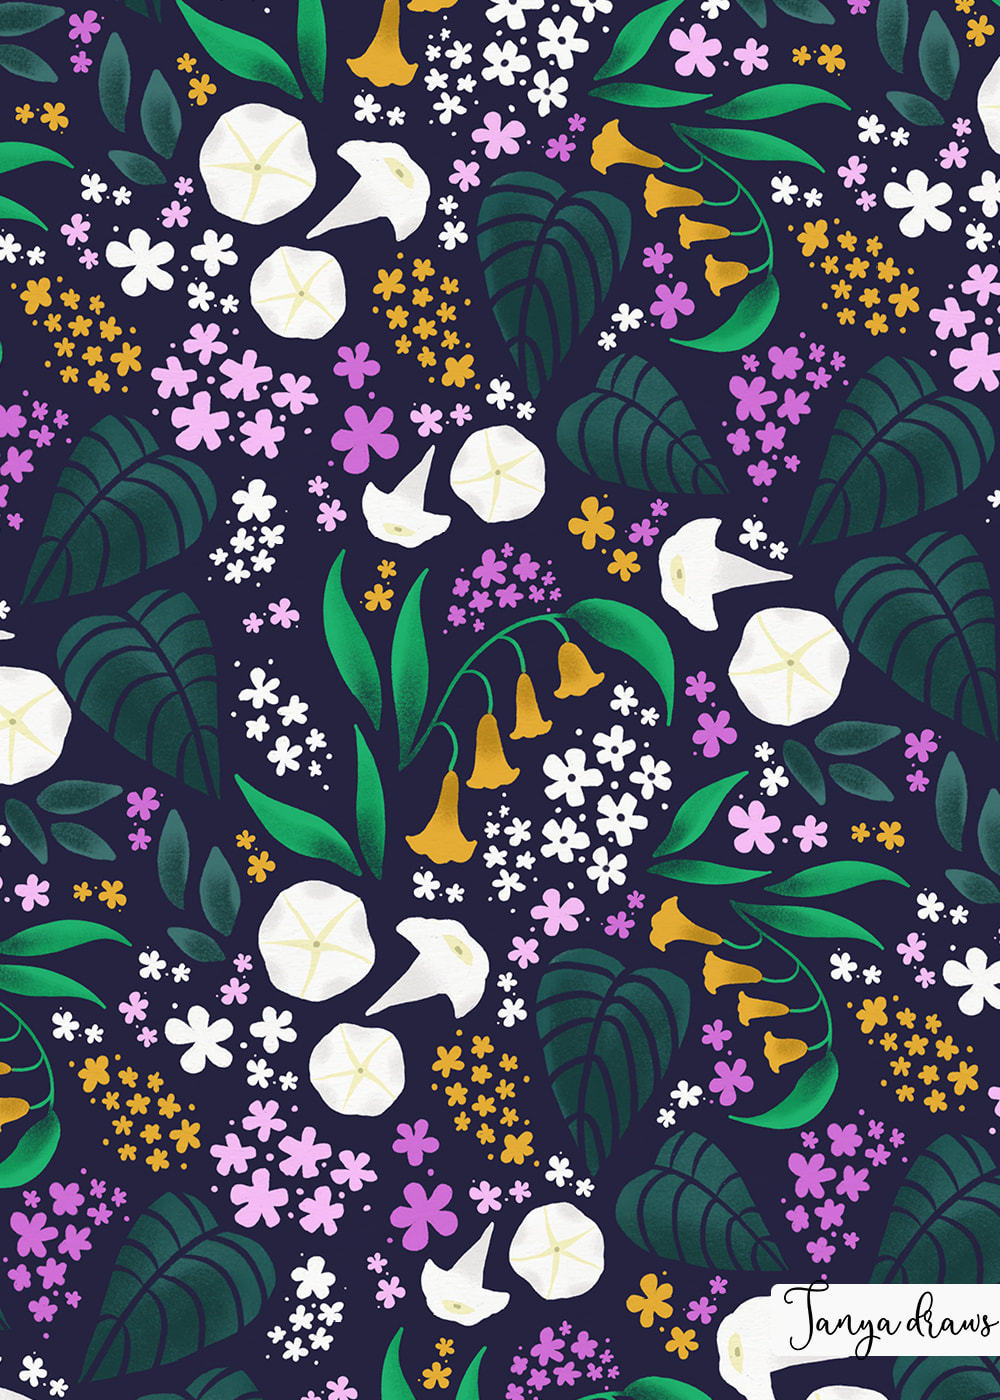 Moon Garden Floral Pattern by TanyaDraws